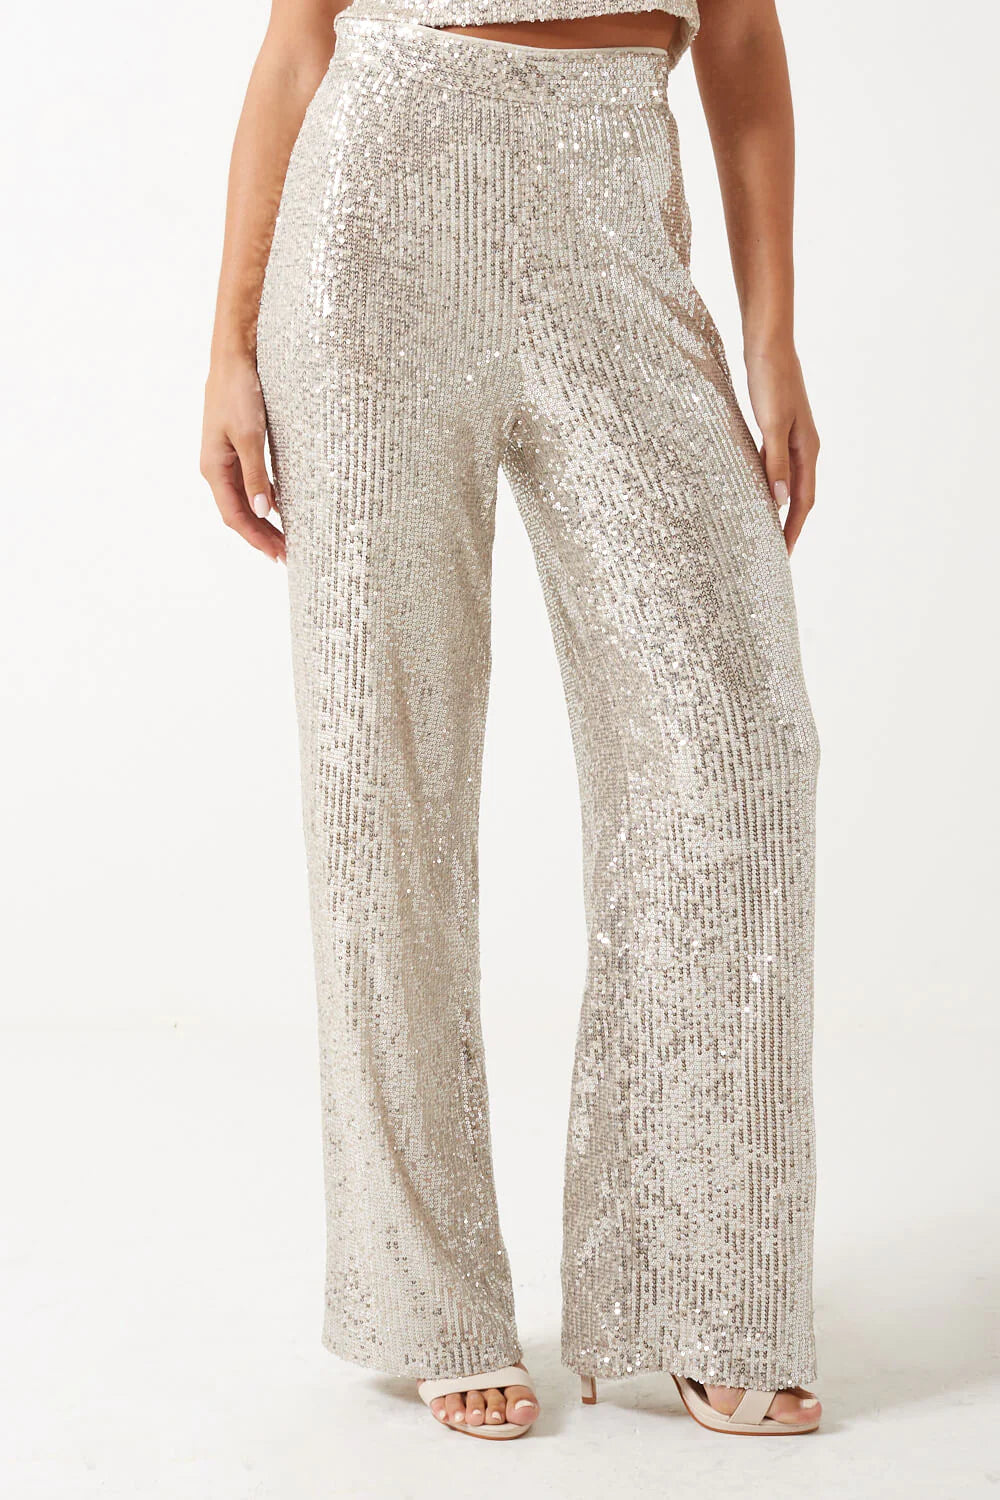 BELLE SEQUIN TROUSERS (CHAMPAGNE)